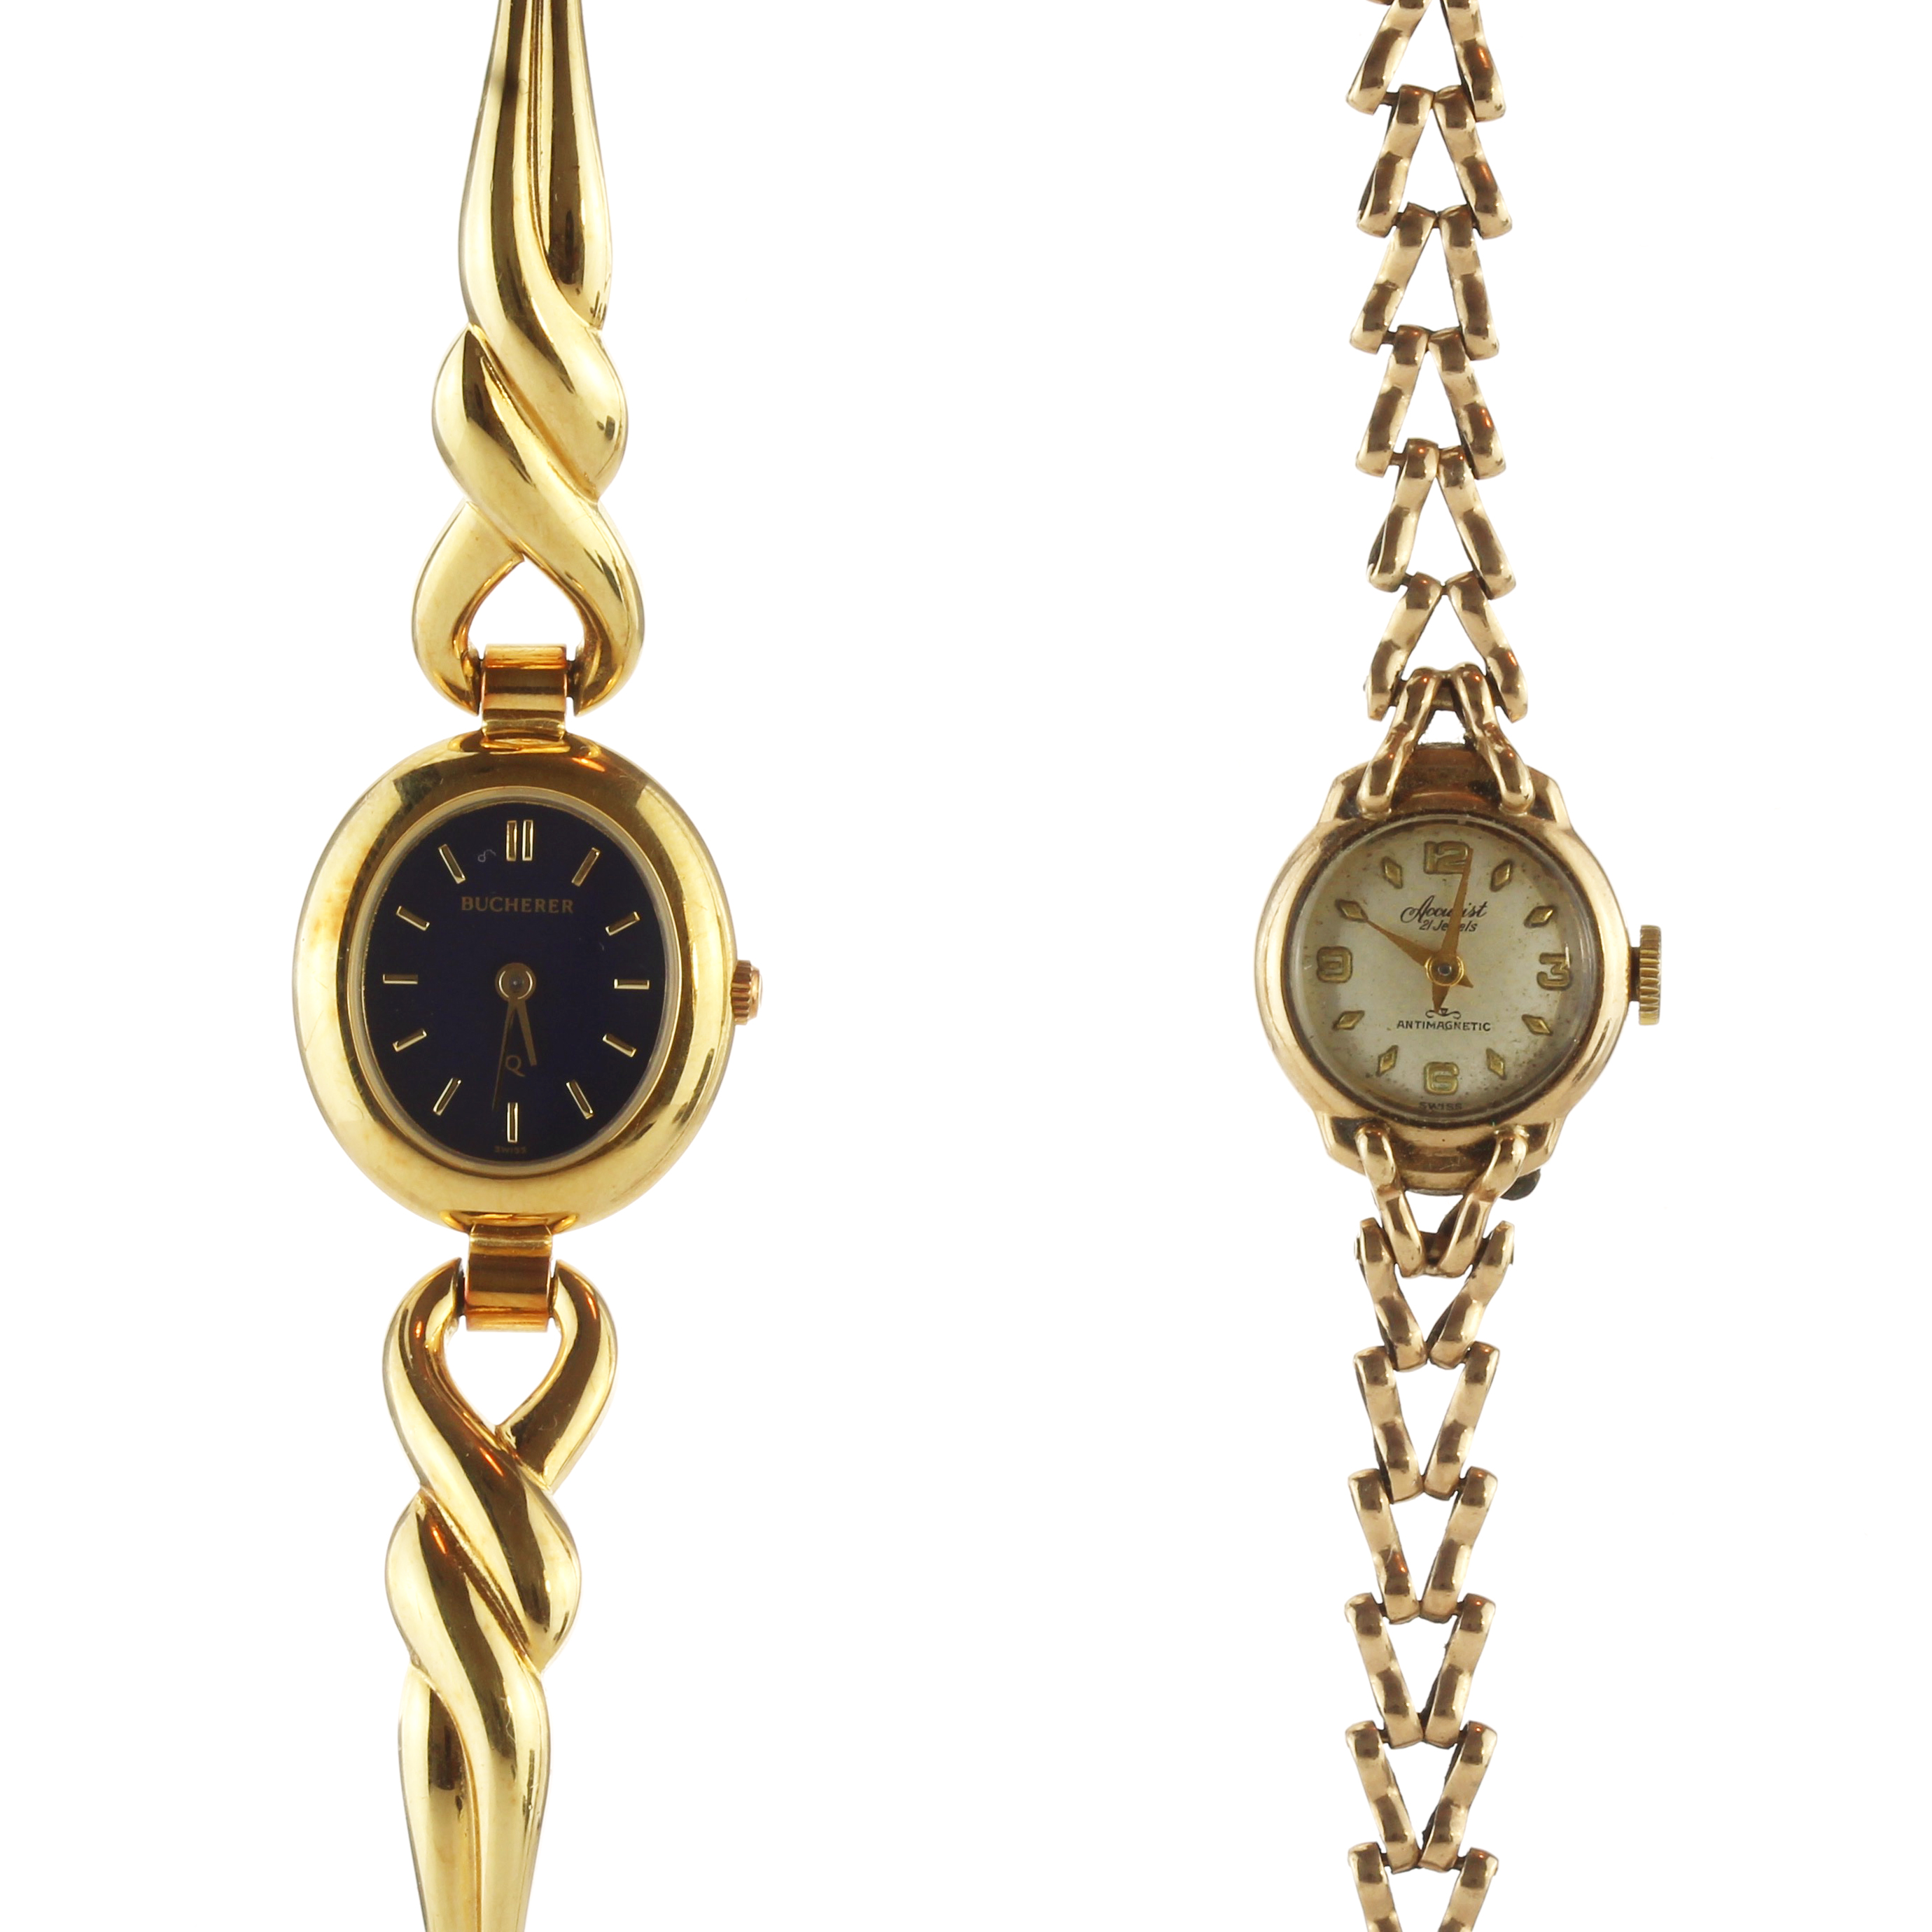 An antique ladies 9ct yellow gold Accurist cocktail watch together with a Bucherer gold plated